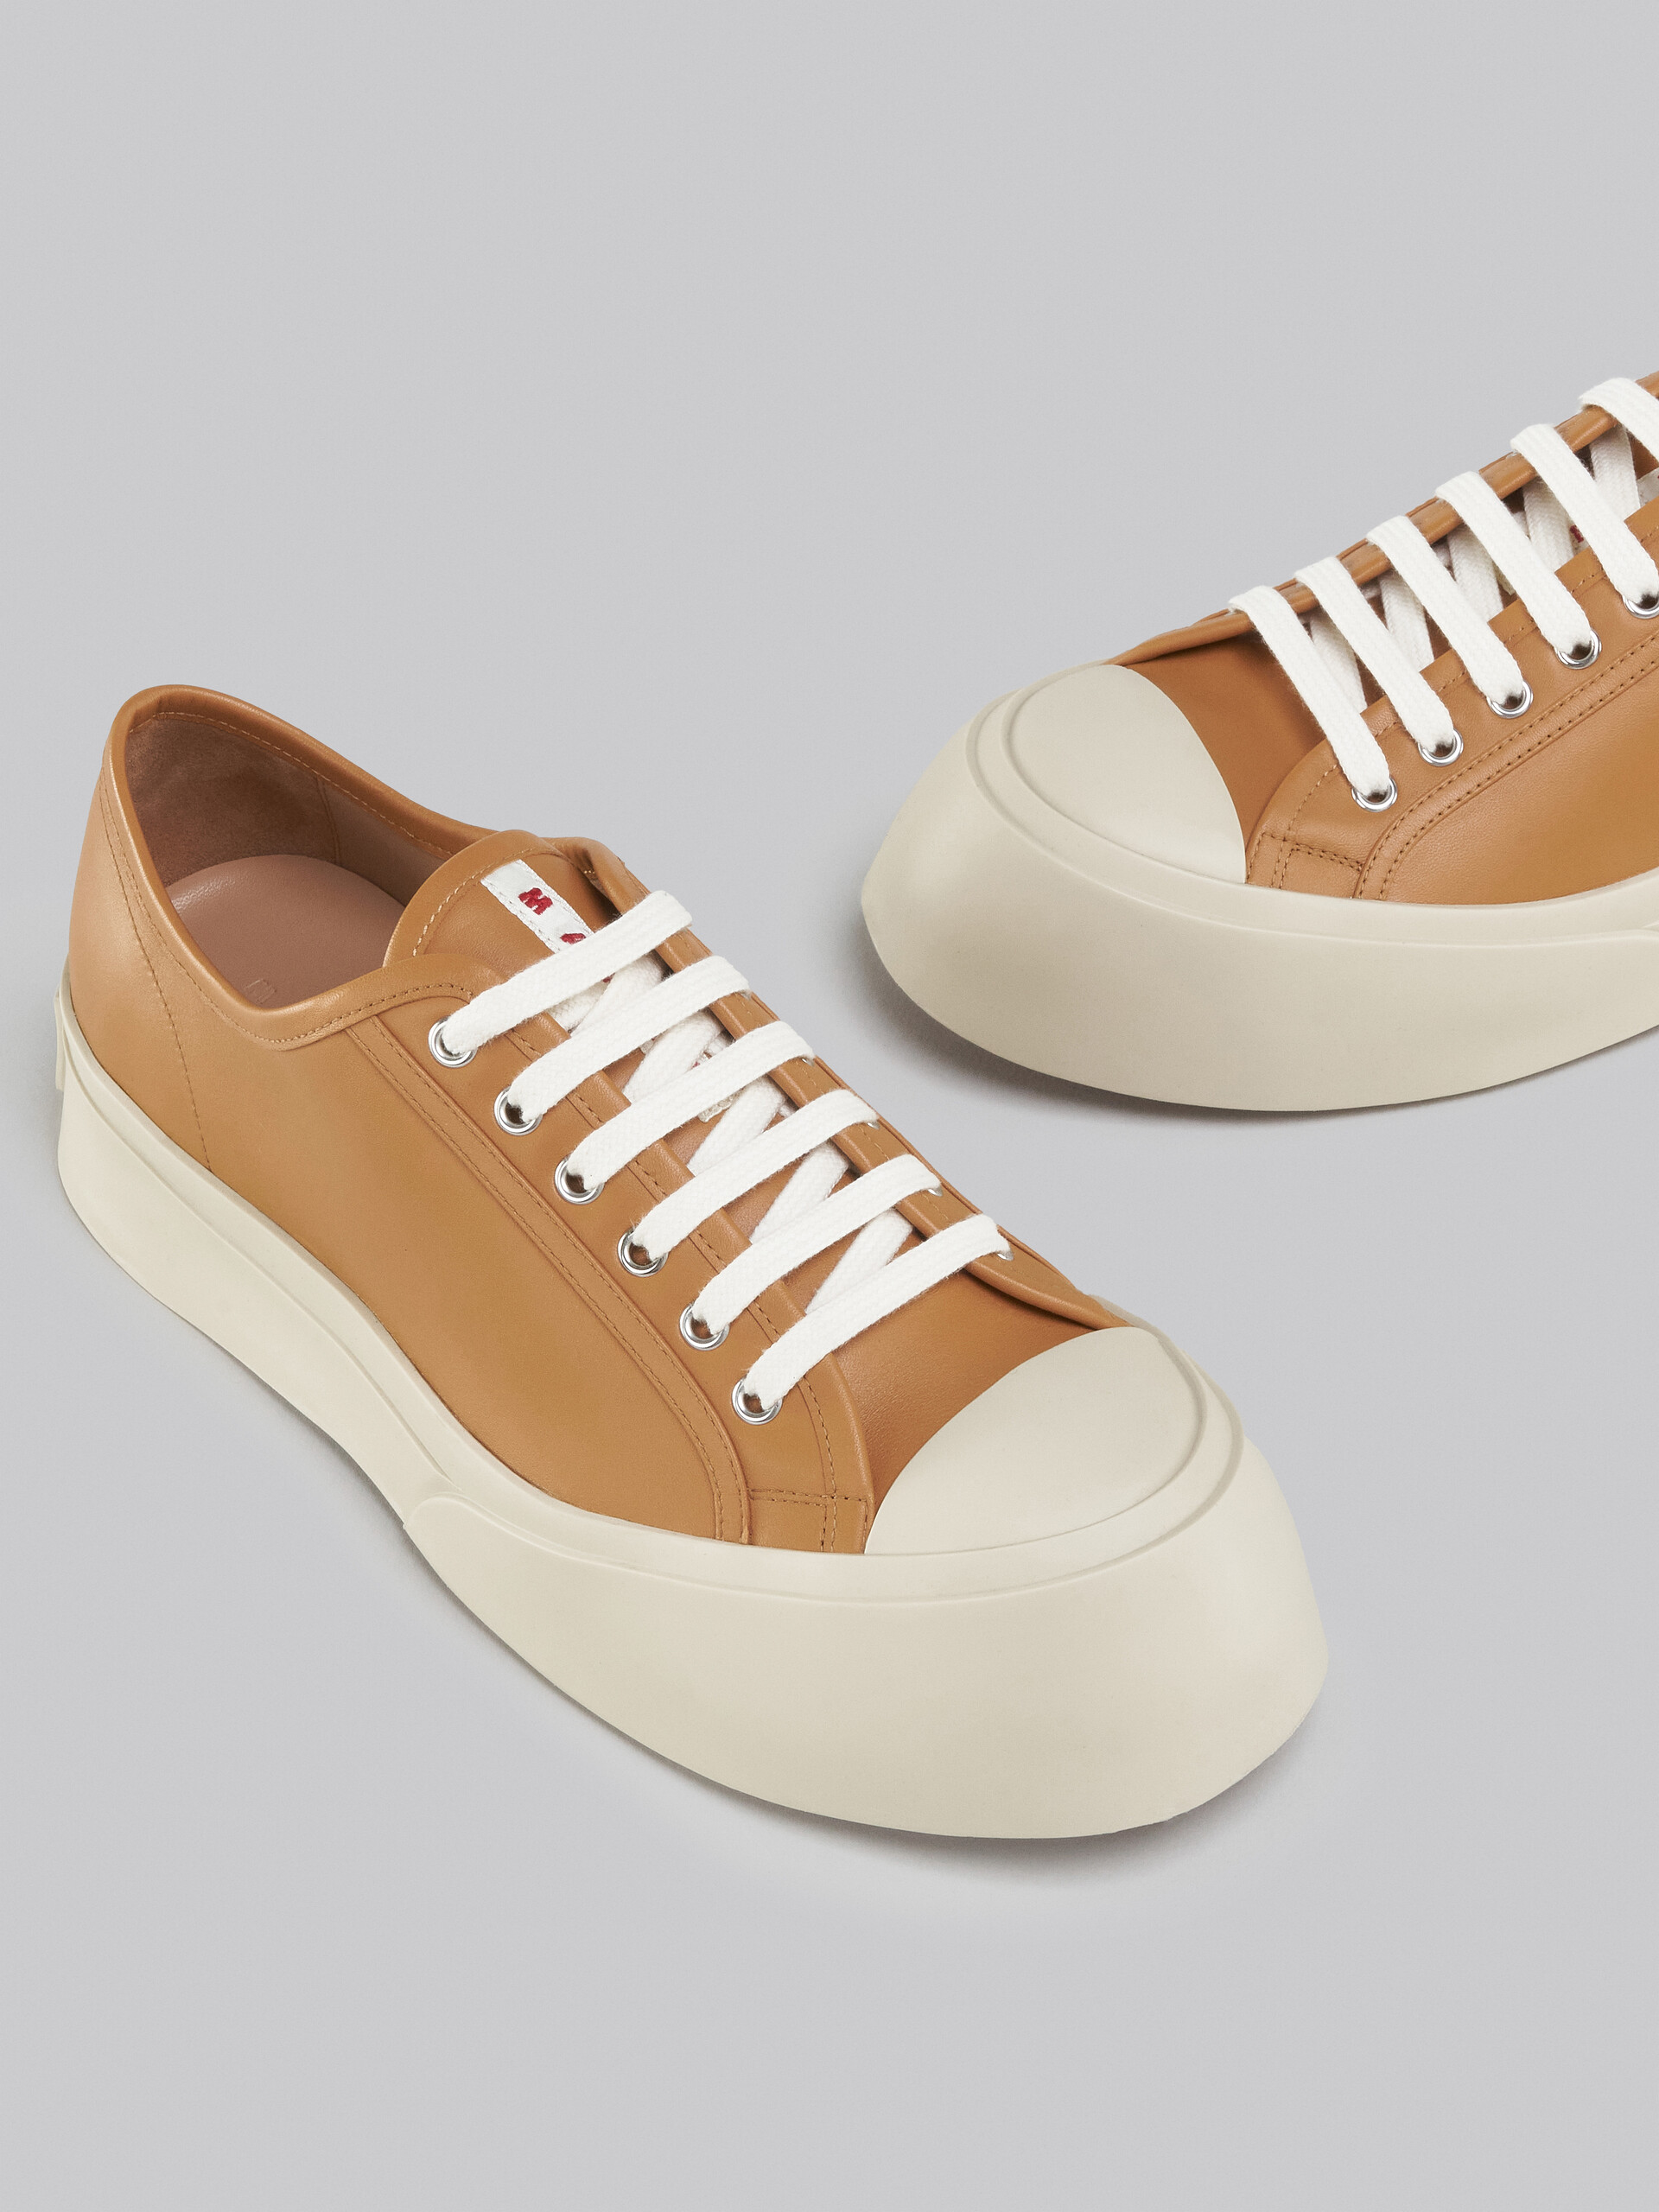 Brown nappa leather Pablo sneaker - Sneakers - Image 5